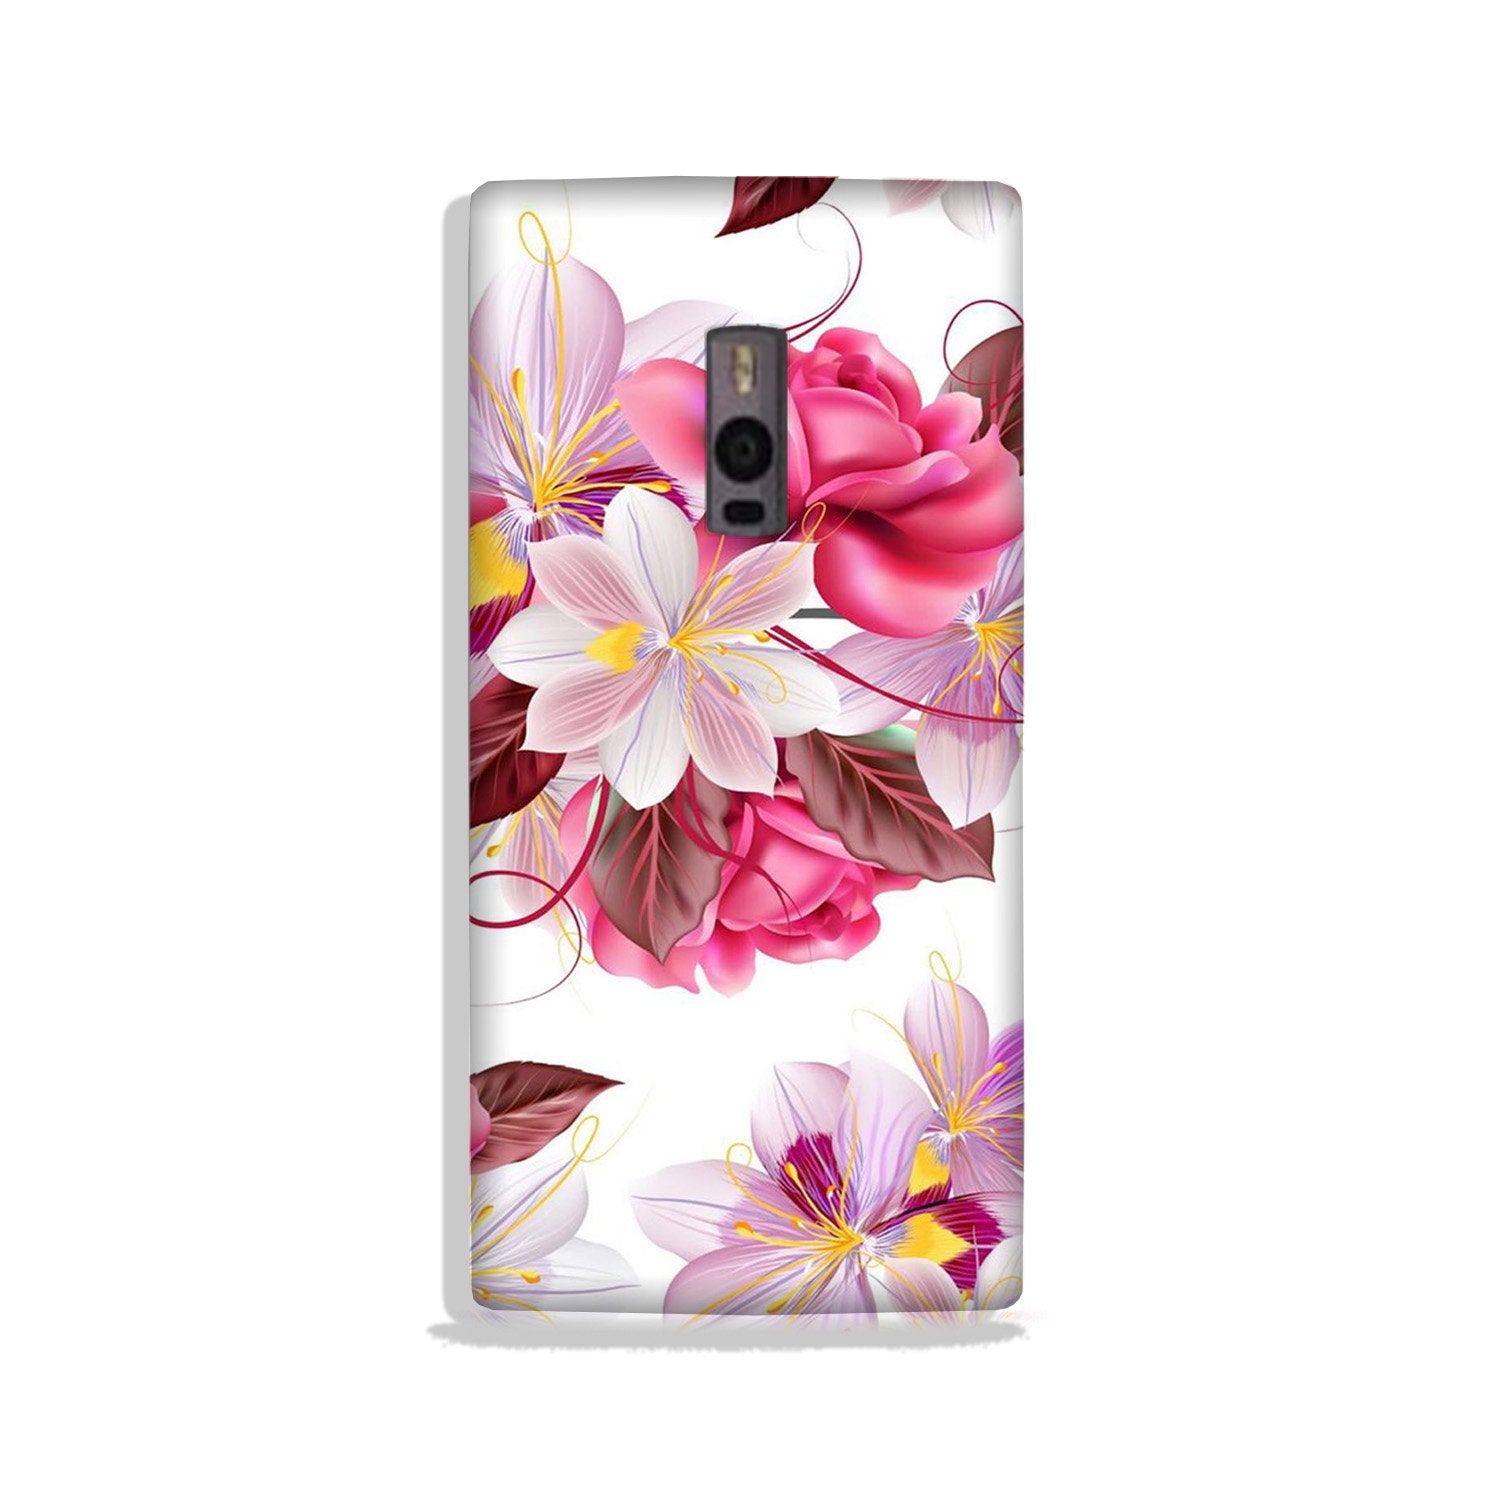 Beautiful flowers Case for OnePlus 2